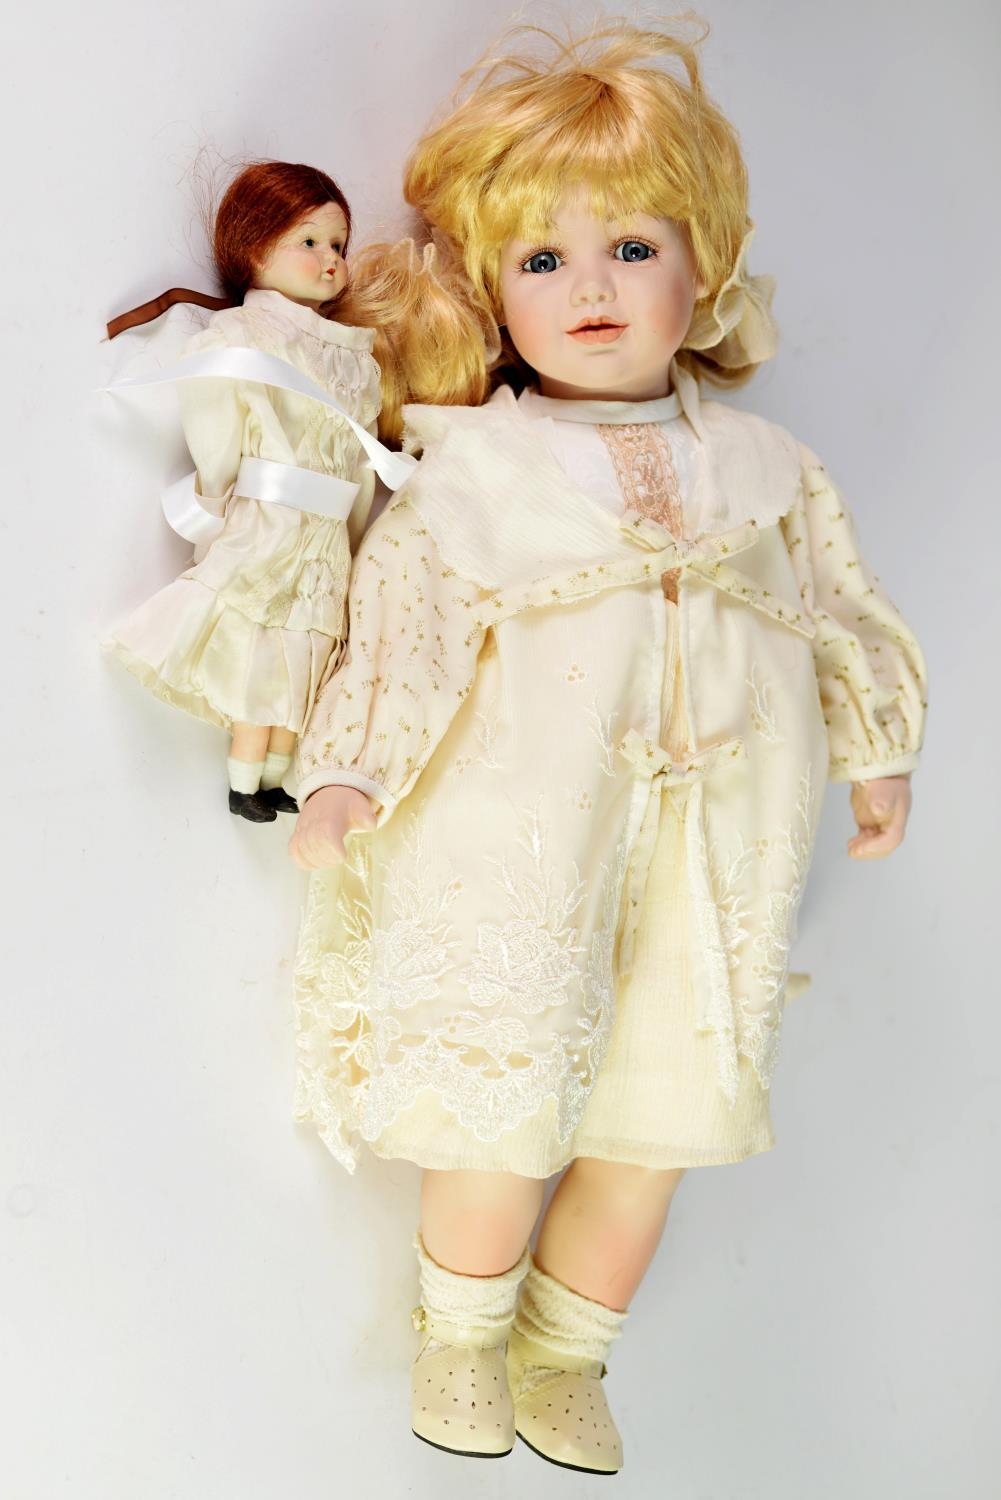 BOXED LEONARDO COLLECTION CERAMIC HEADED COLLECTOR'S DOLL with pigtails and holding a teddy bear, - Image 2 of 4